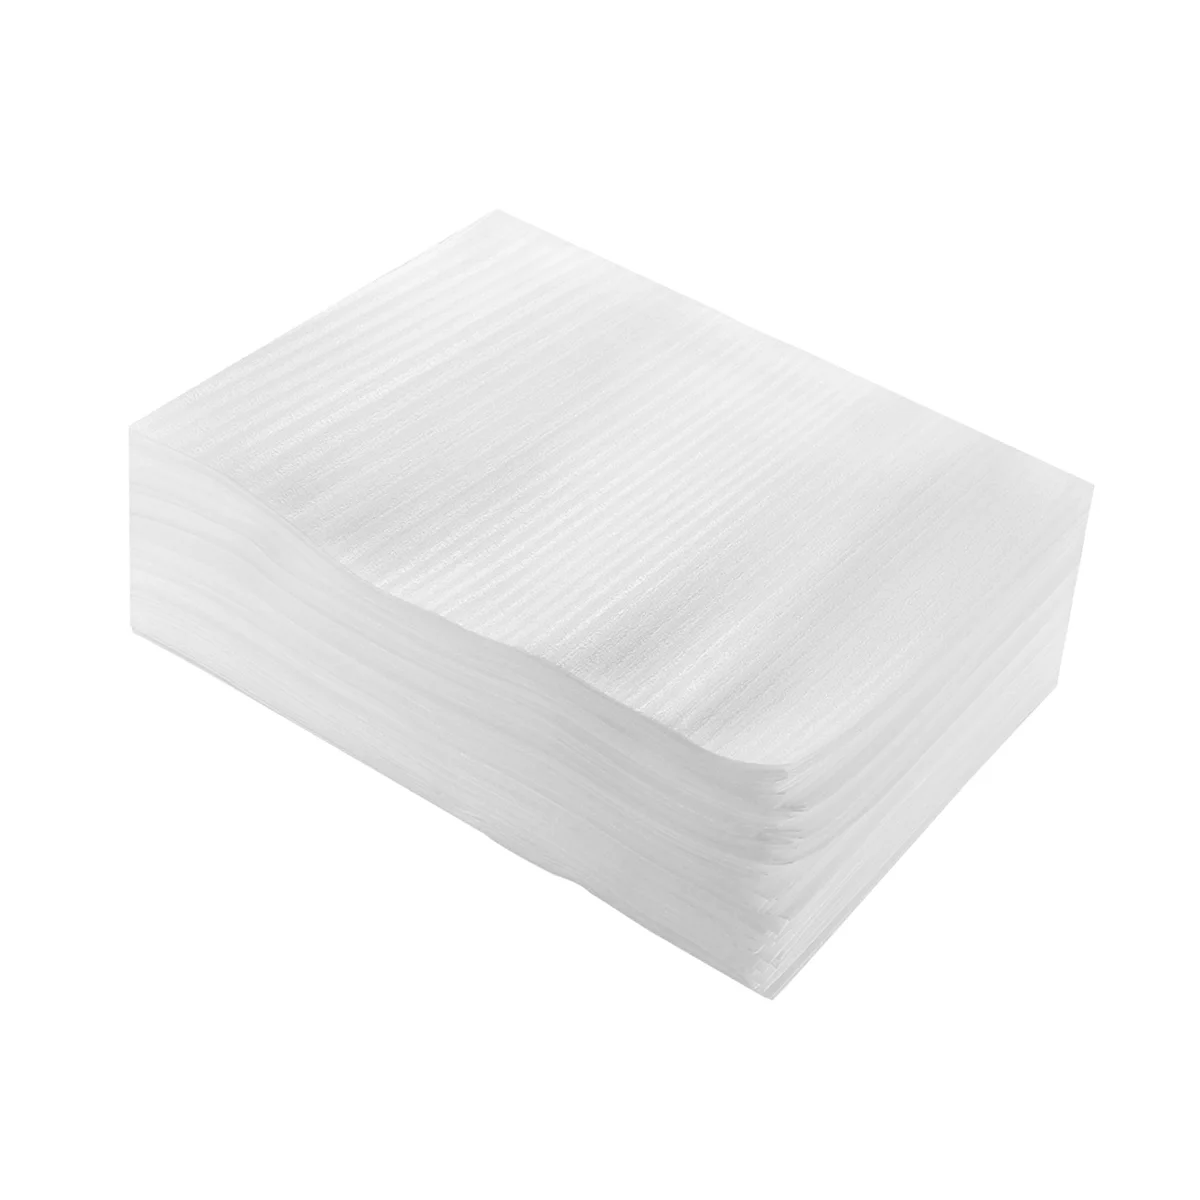 

100Pcs Poly Mailers, Coated Pearl Cotton Bag Envelopes Shipping Bags White Poly Mailers Small Business Mailing Packages for